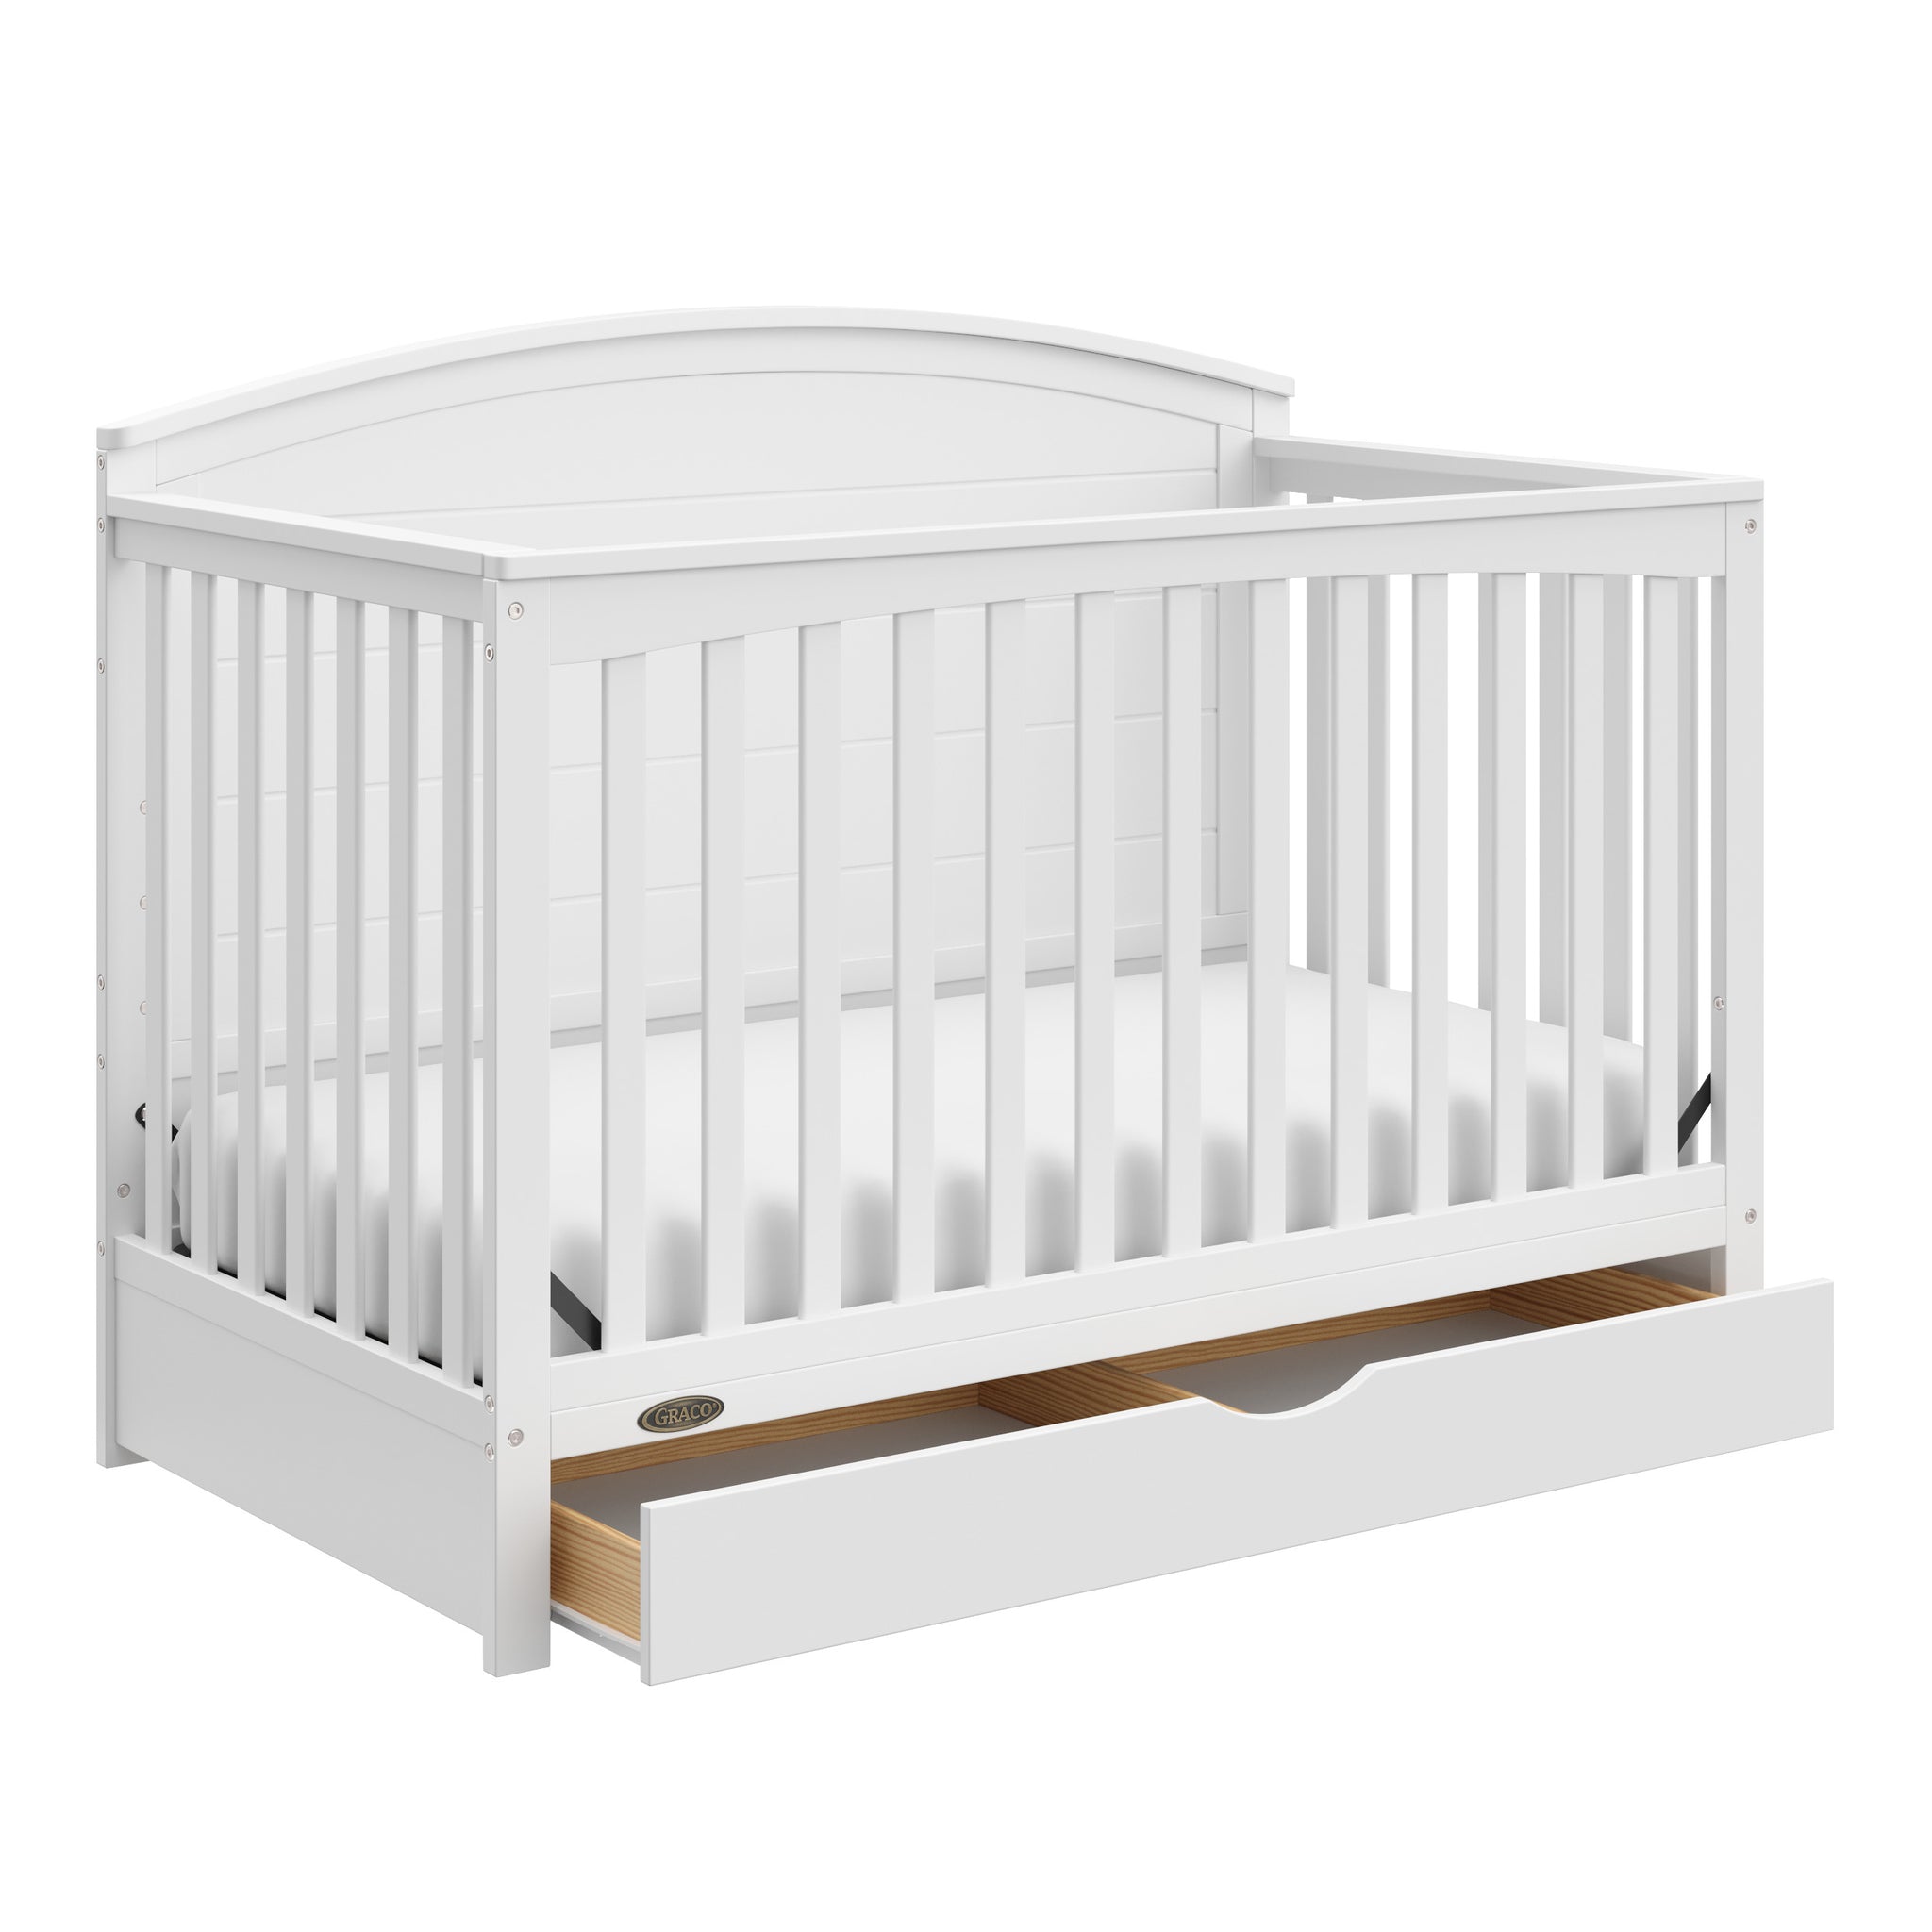 Convertible white crib with an open drawer, viewed from an angle